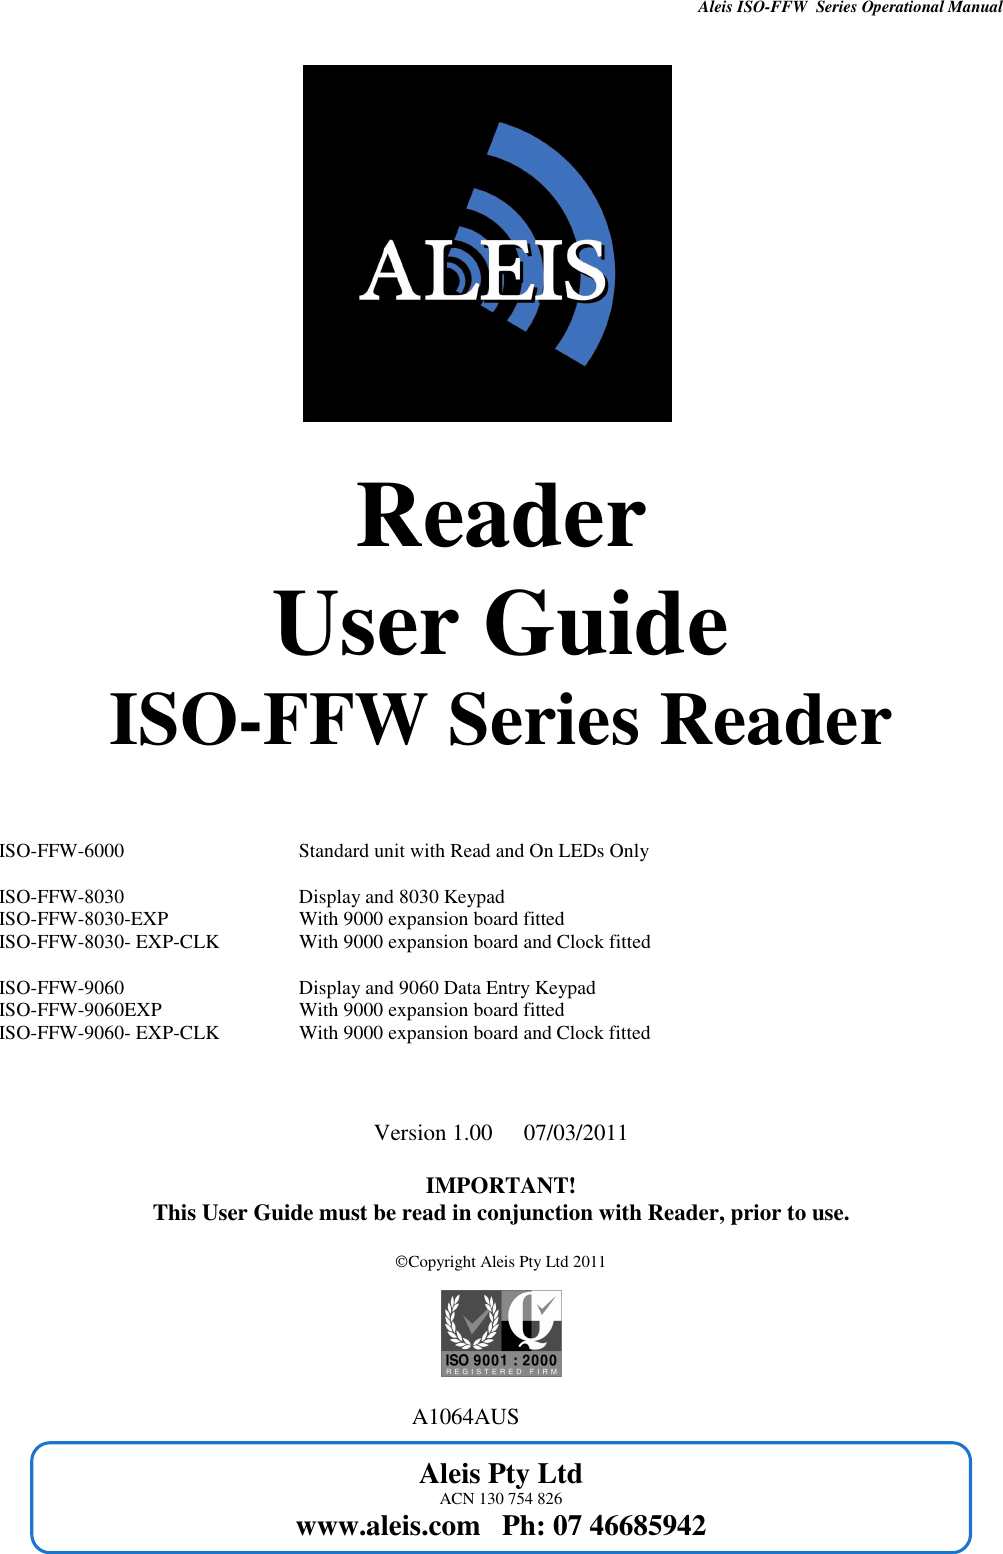 Aleis ISO-FFW  Series Operational Manual      Aleis Pty Ltd ACN 130 754 826 www.aleis.com   Ph: 07 46685942             Reader User Guide ISO-FFW Series Reader    ISO-FFW-6000               Standard unit with Read and On LEDs Only  ISO-FFW-8030      Display and 8030 Keypad ISO-FFW-8030-EXP          With 9000 expansion board fitted ISO-FFW-8030- EXP-CLK          With 9000 expansion board and Clock fitted  ISO-FFW-9060      Display and 9060 Data Entry Keypad ISO-FFW-9060EXP          With 9000 expansion board fitted ISO-FFW-9060- EXP-CLK   With 9000 expansion board and Clock fitted    Version 1.00  07/03/2011  IMPORTANT! This User Guide must be read in conjunction with Reader, prior to use.  Copyright Aleis Pty Ltd 2011                                                                              A1064AUS   